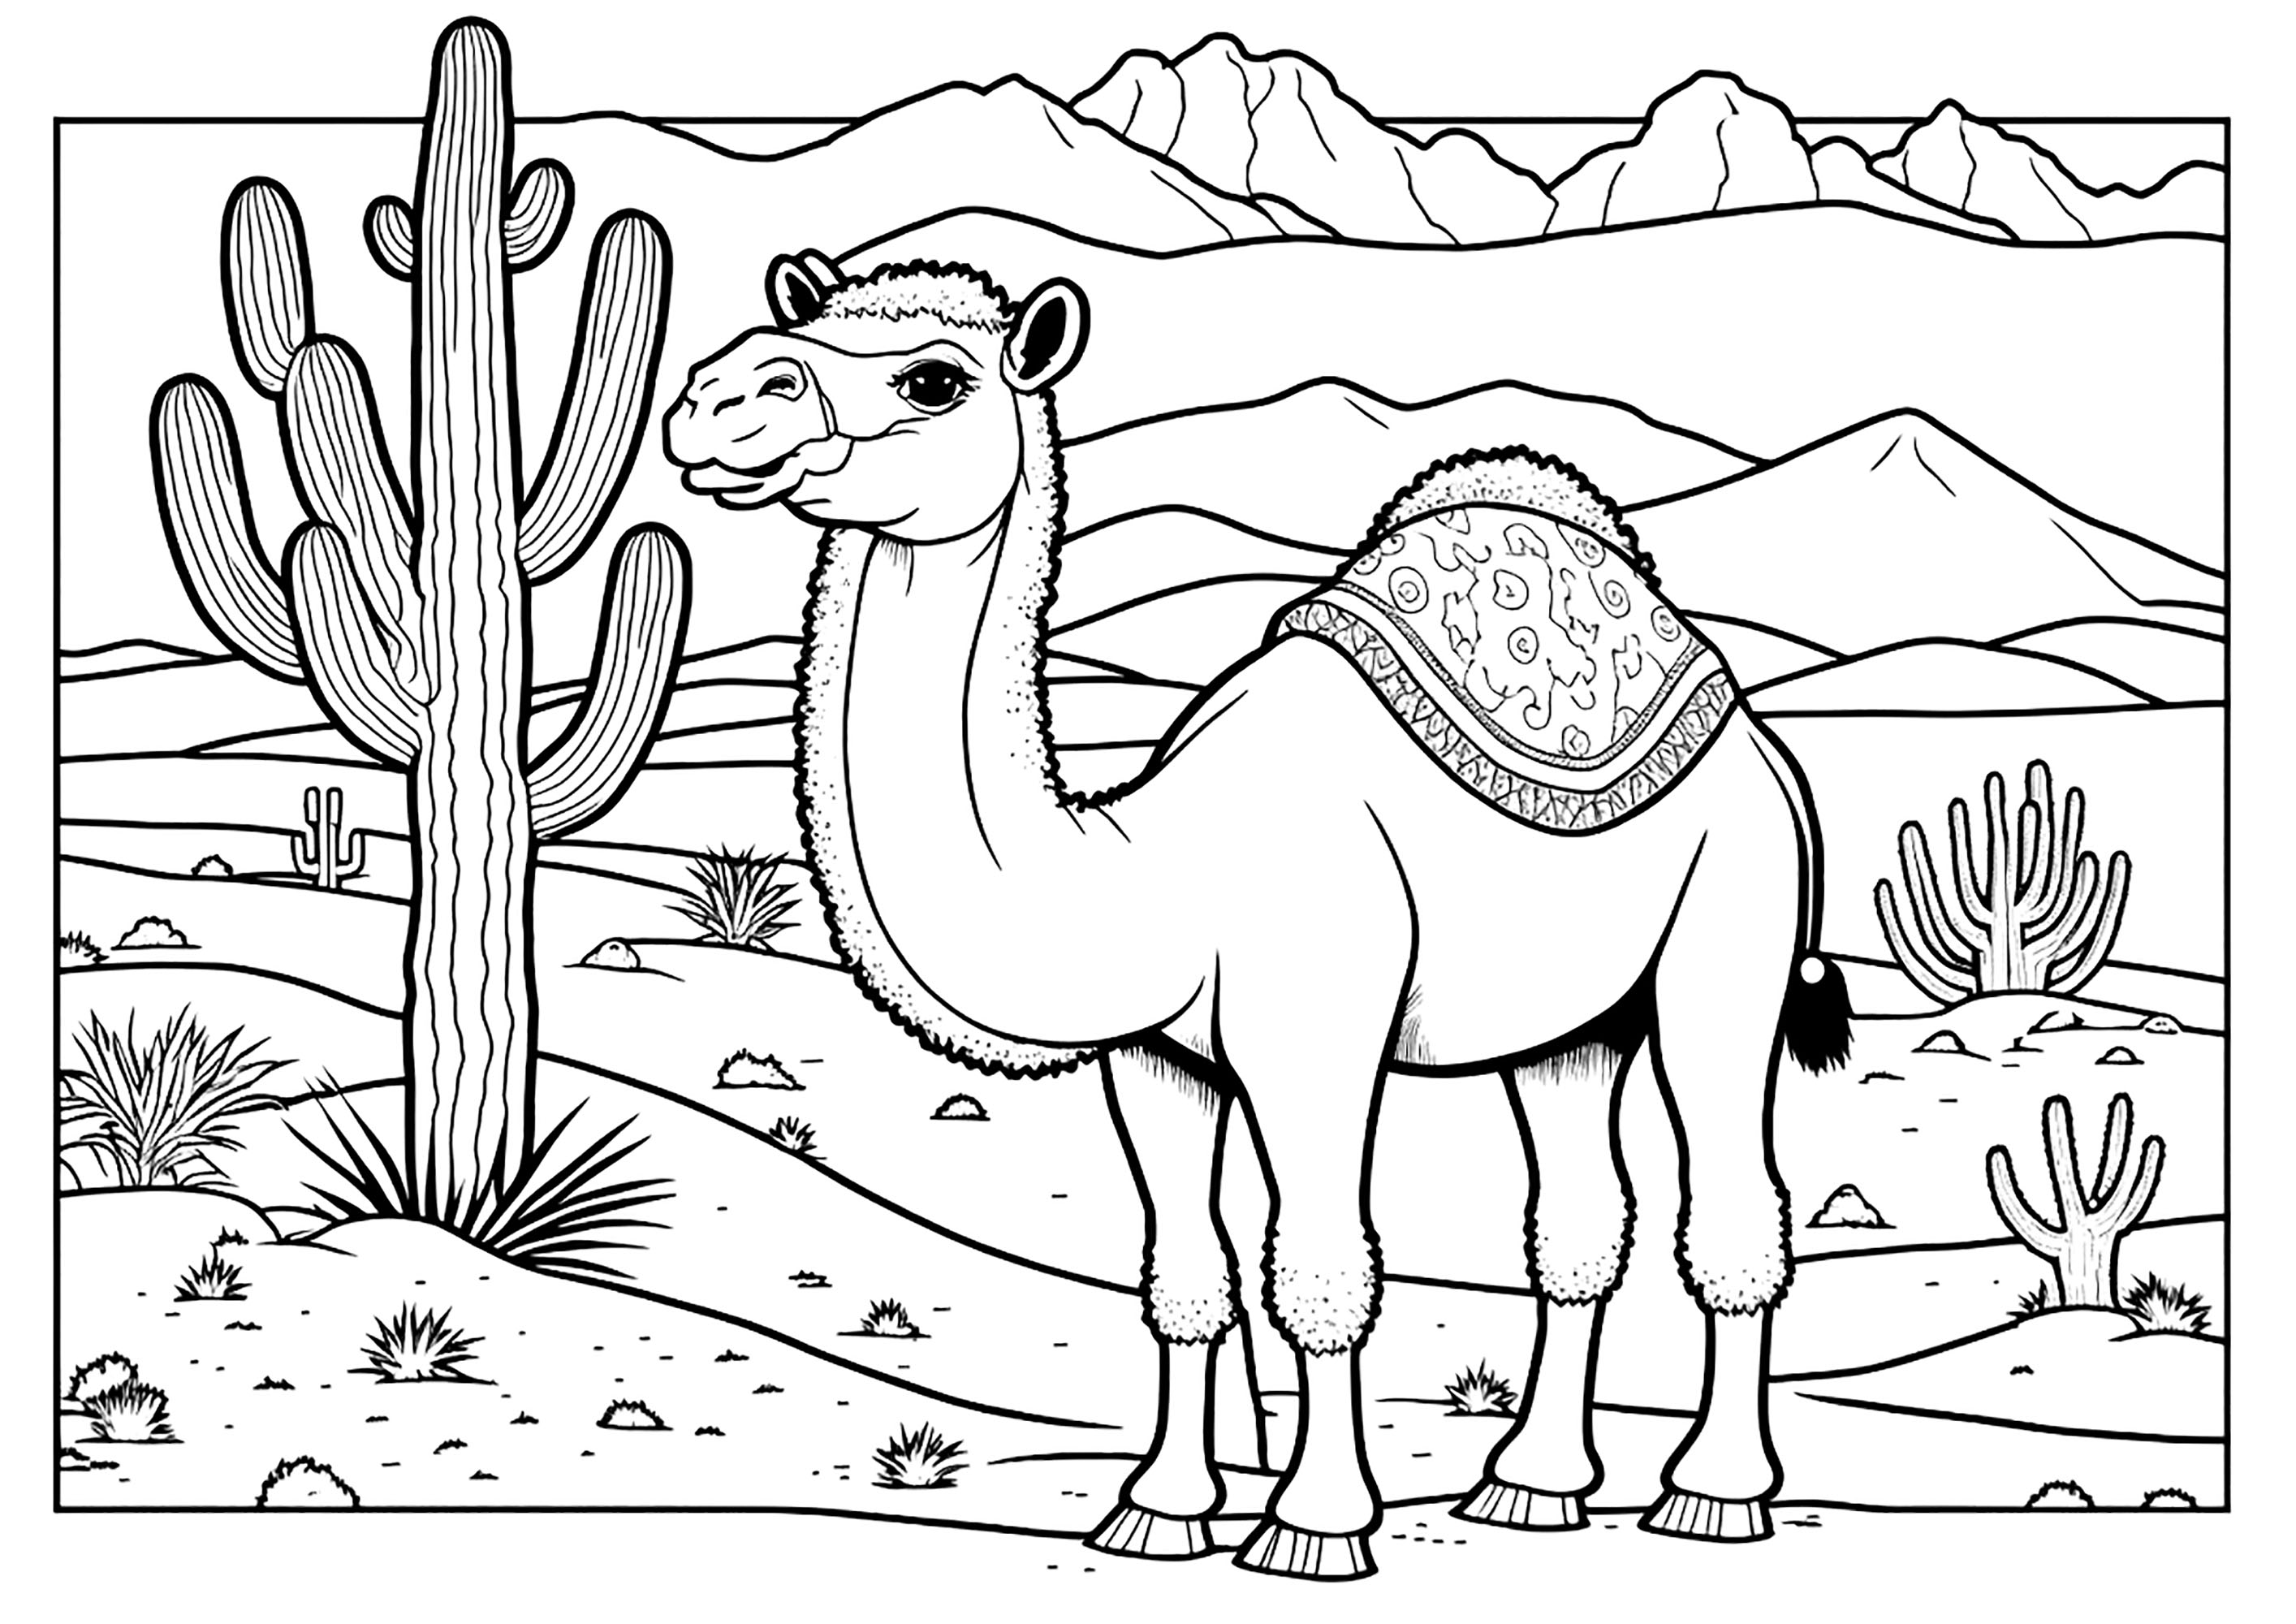 Dromedary in the desert, with a big cactus. This beautiful camel is standing on the warm sand, with its long legs and elongated neck. We see sand dunes and mountains in the background. A large cactus stands majestically to the left of the camel.